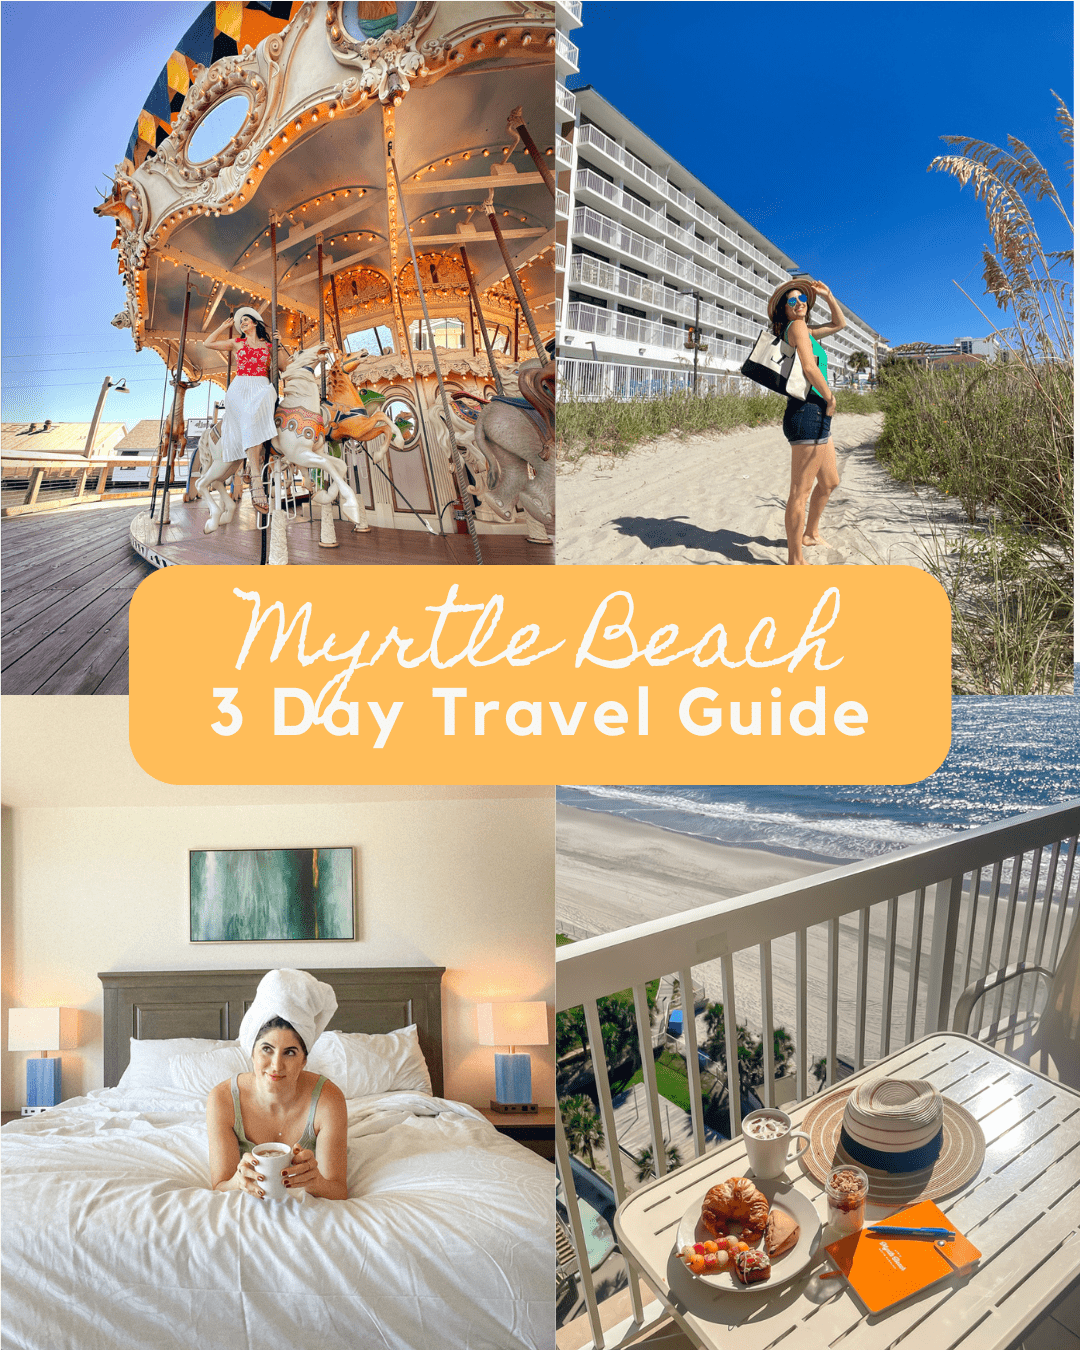 3 Day Travel Guide in Myrtle Beach, South Carolina with Westgate Resorts by Travel Blogger Laura Lily,